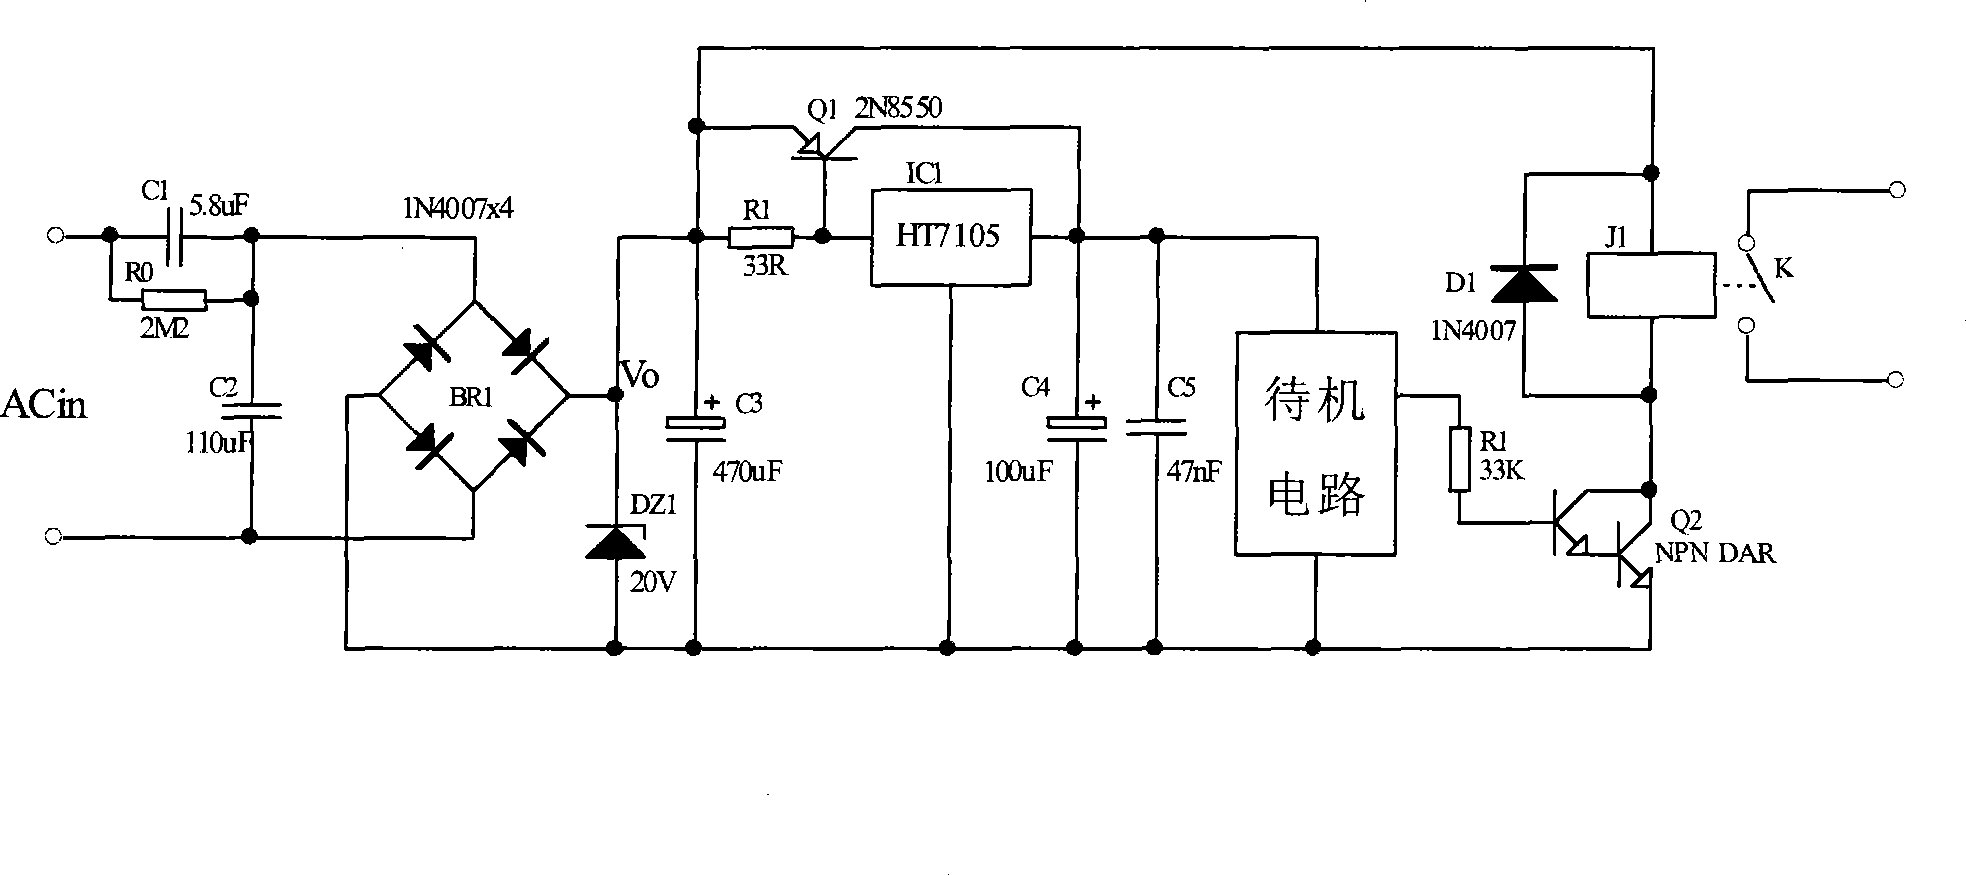 Ultramicro power consumption standby power supply